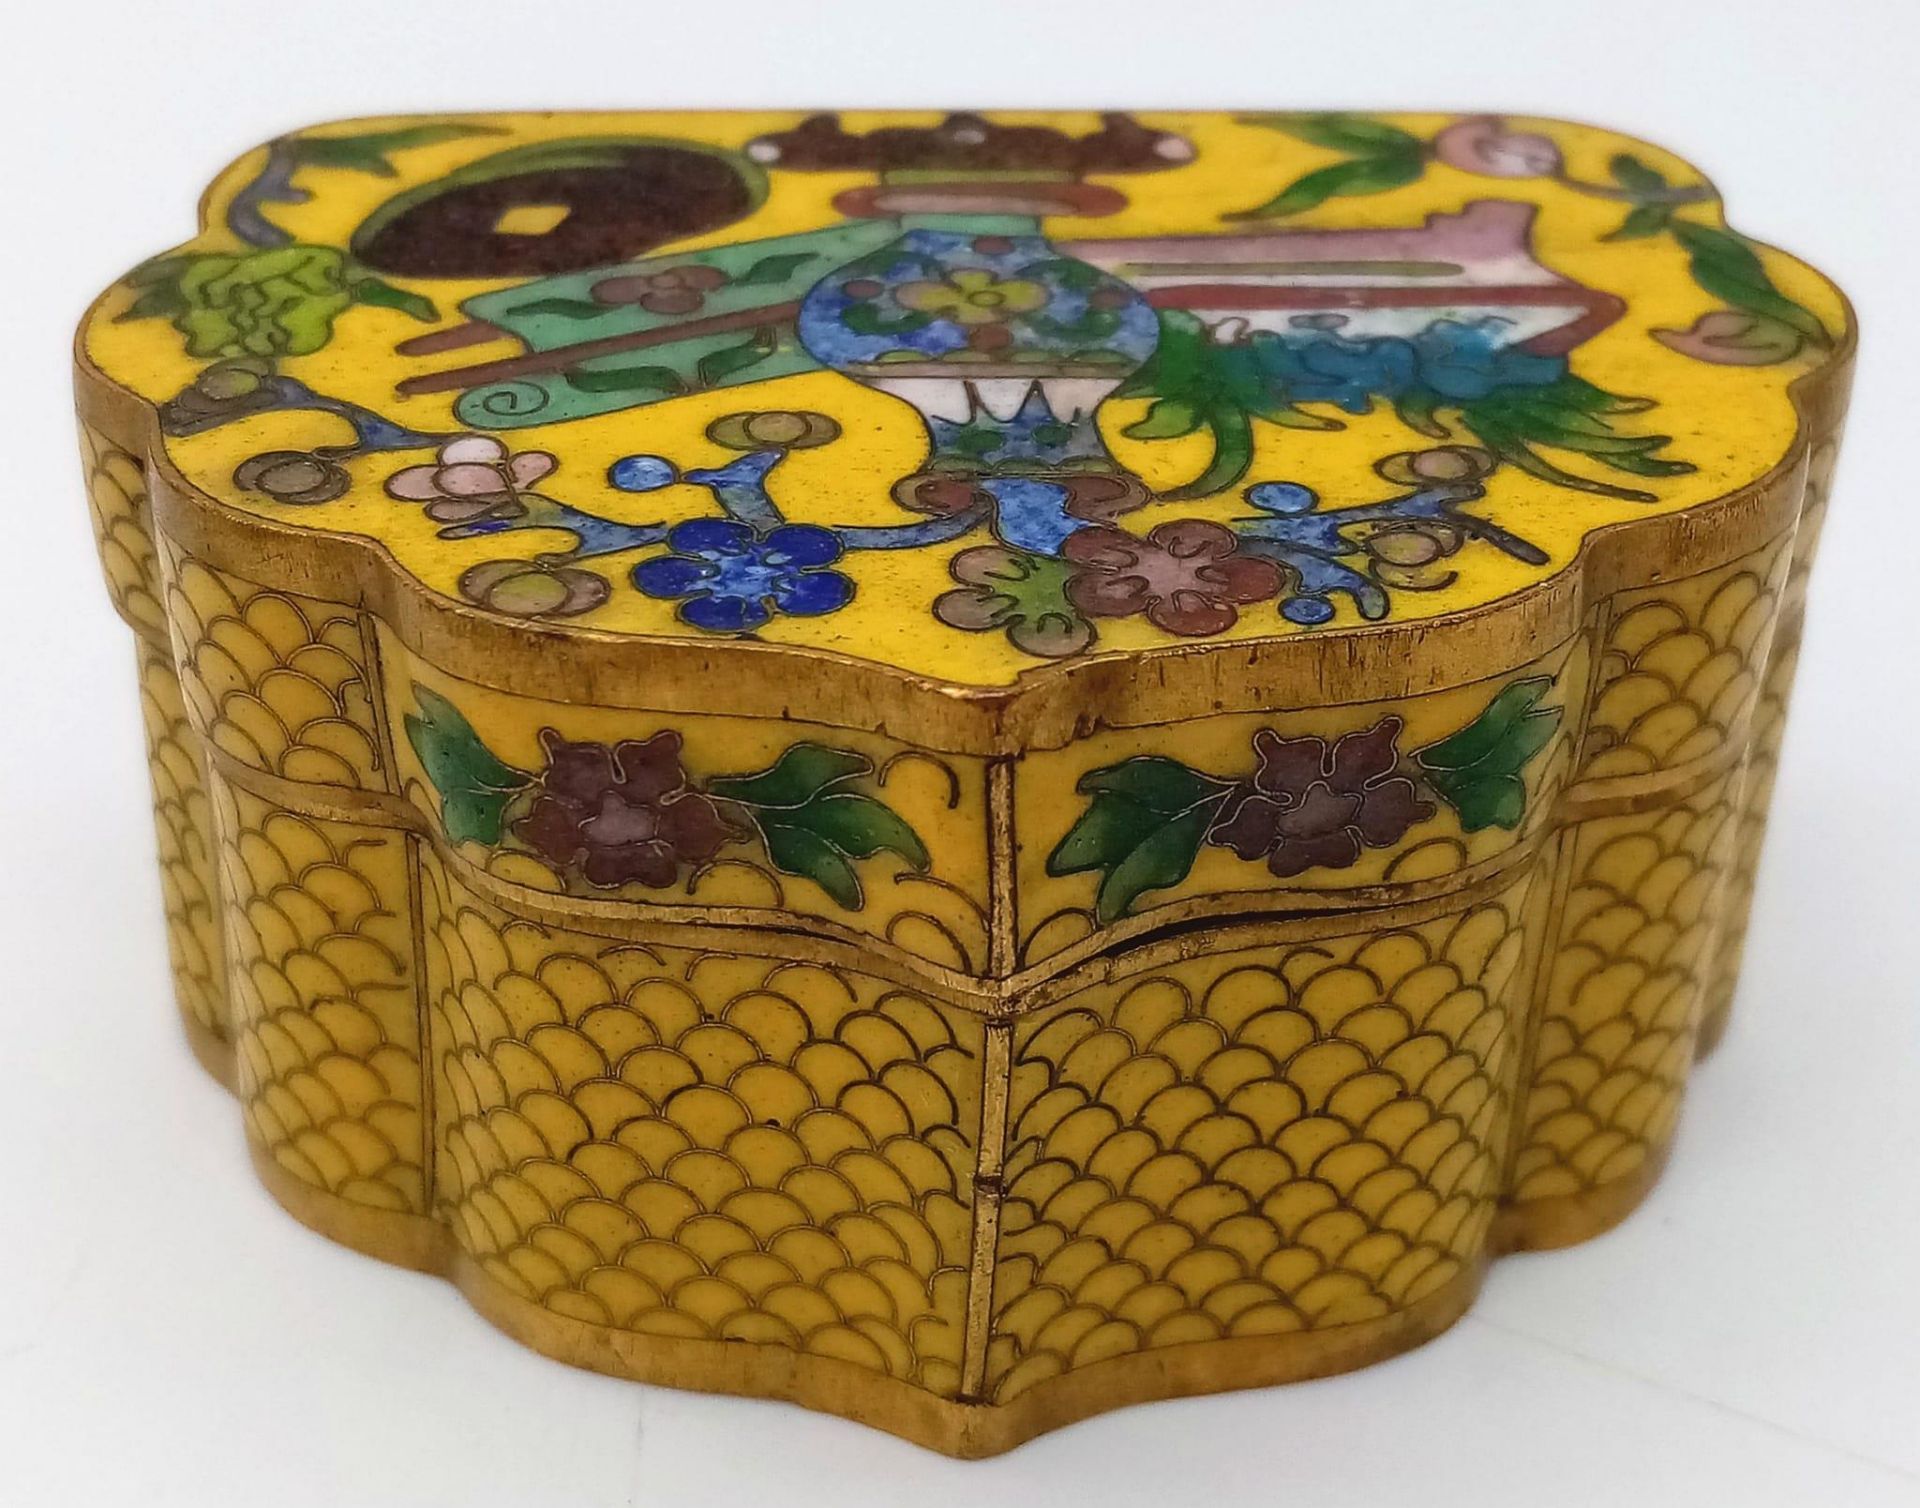 AN EXQUISITE EXAMPLE OF 19TH CENTURY CHINESE CLOISONNE WORK IN THE FORM OF A SMALL TRINKET BOX . - Image 2 of 6